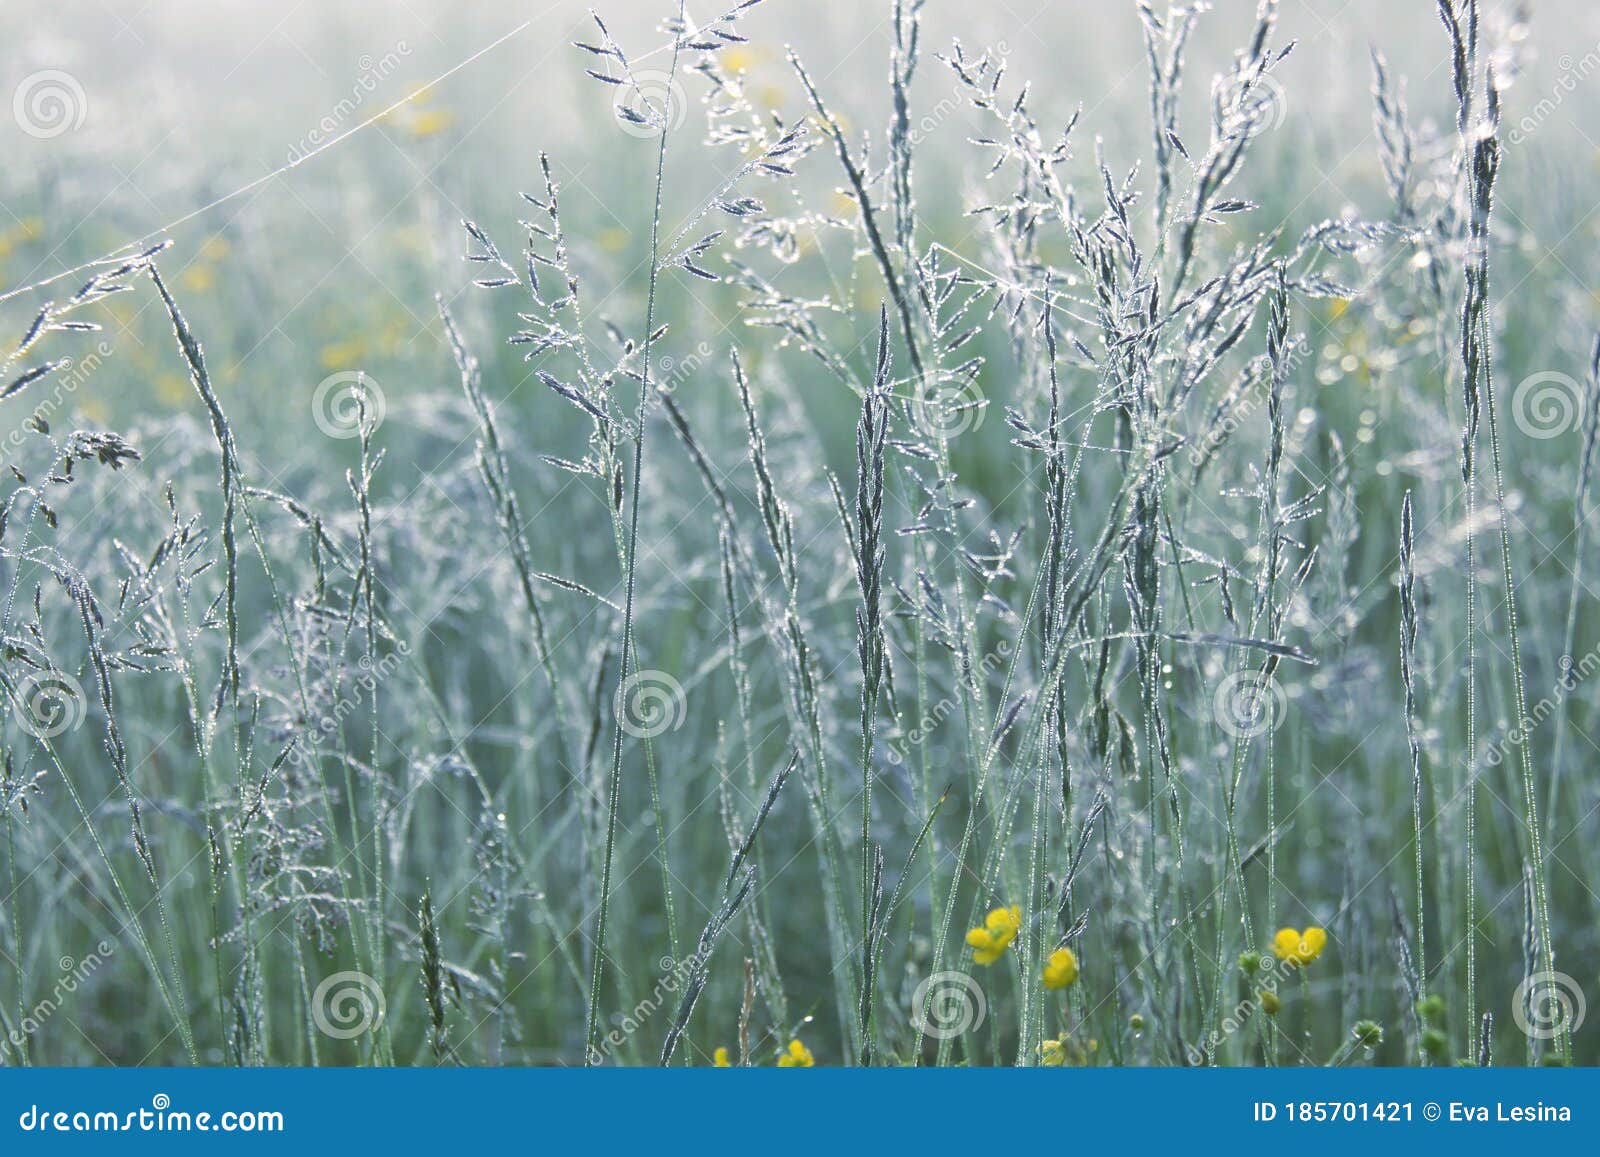 Meadow Fescue And Yellow Flowers With Dew In Summer Stock Image Image